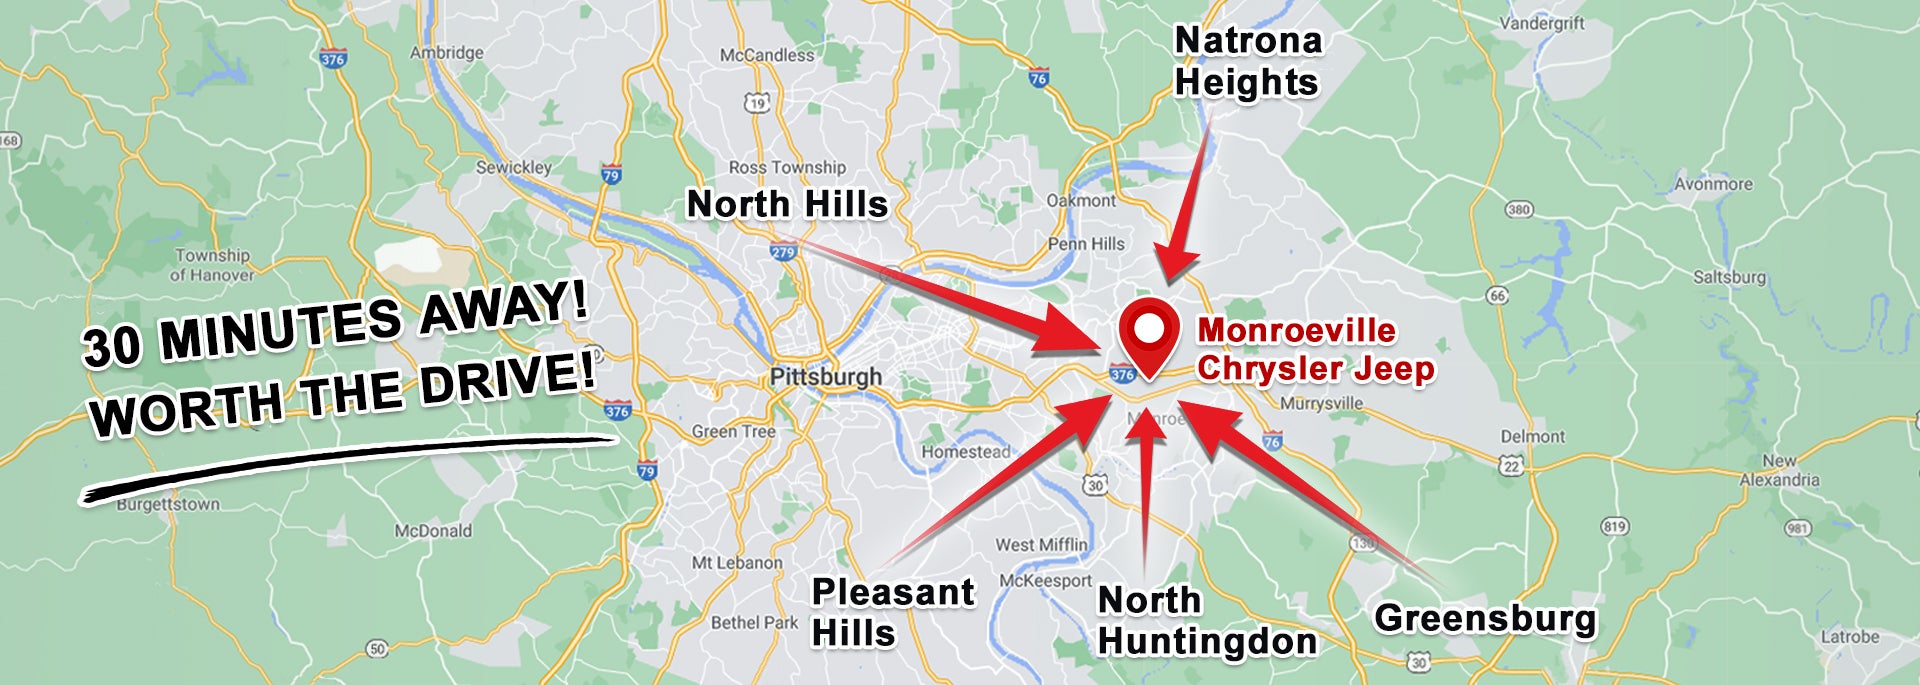 Map to Monroeville Chrysler Jeep